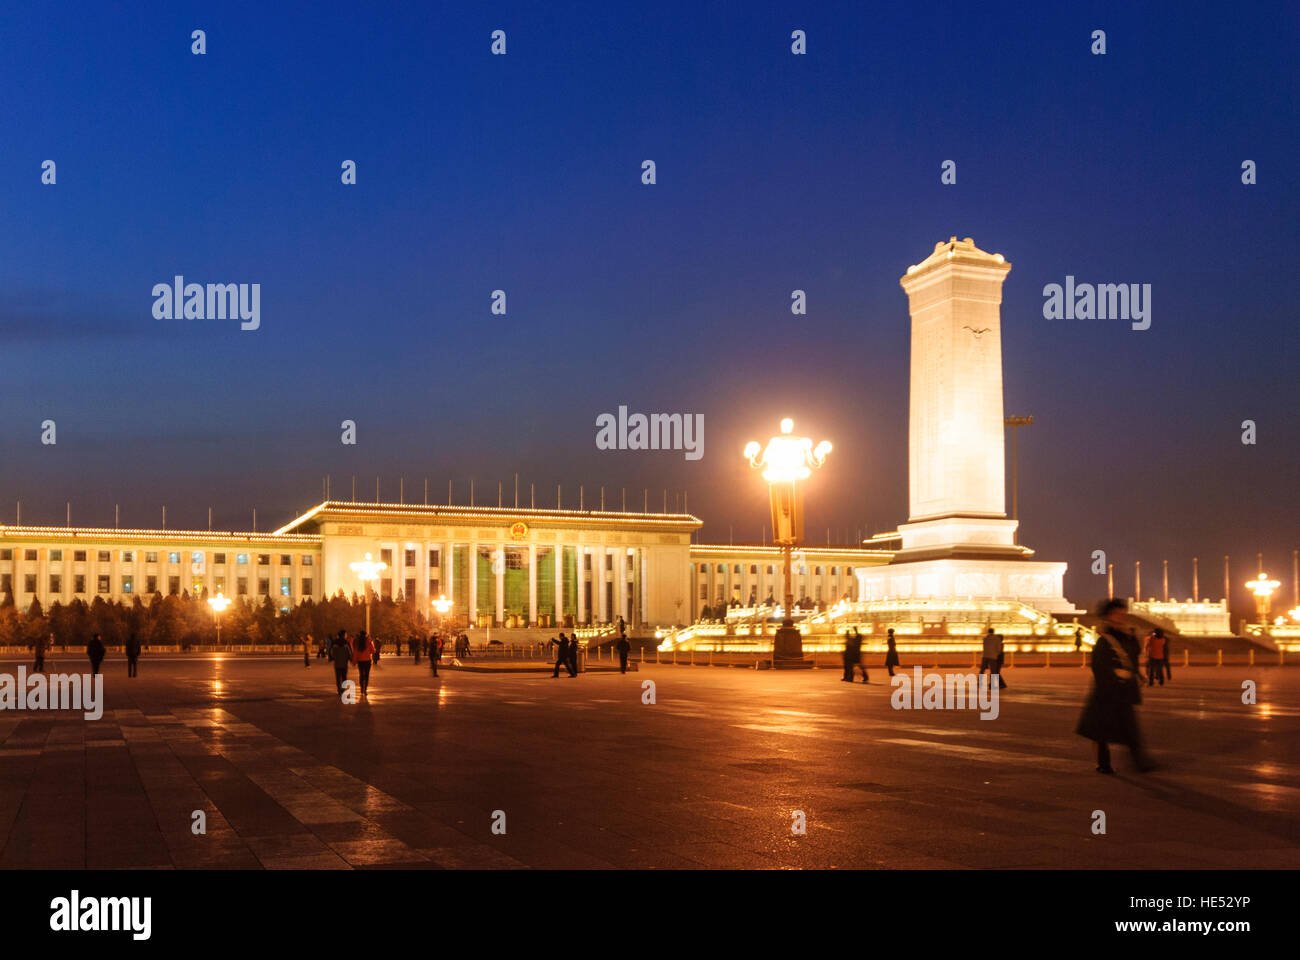 Peking: Tiananmen Square; Great hall of the people and monument to the national heroes, Beijing, China Stock Photo